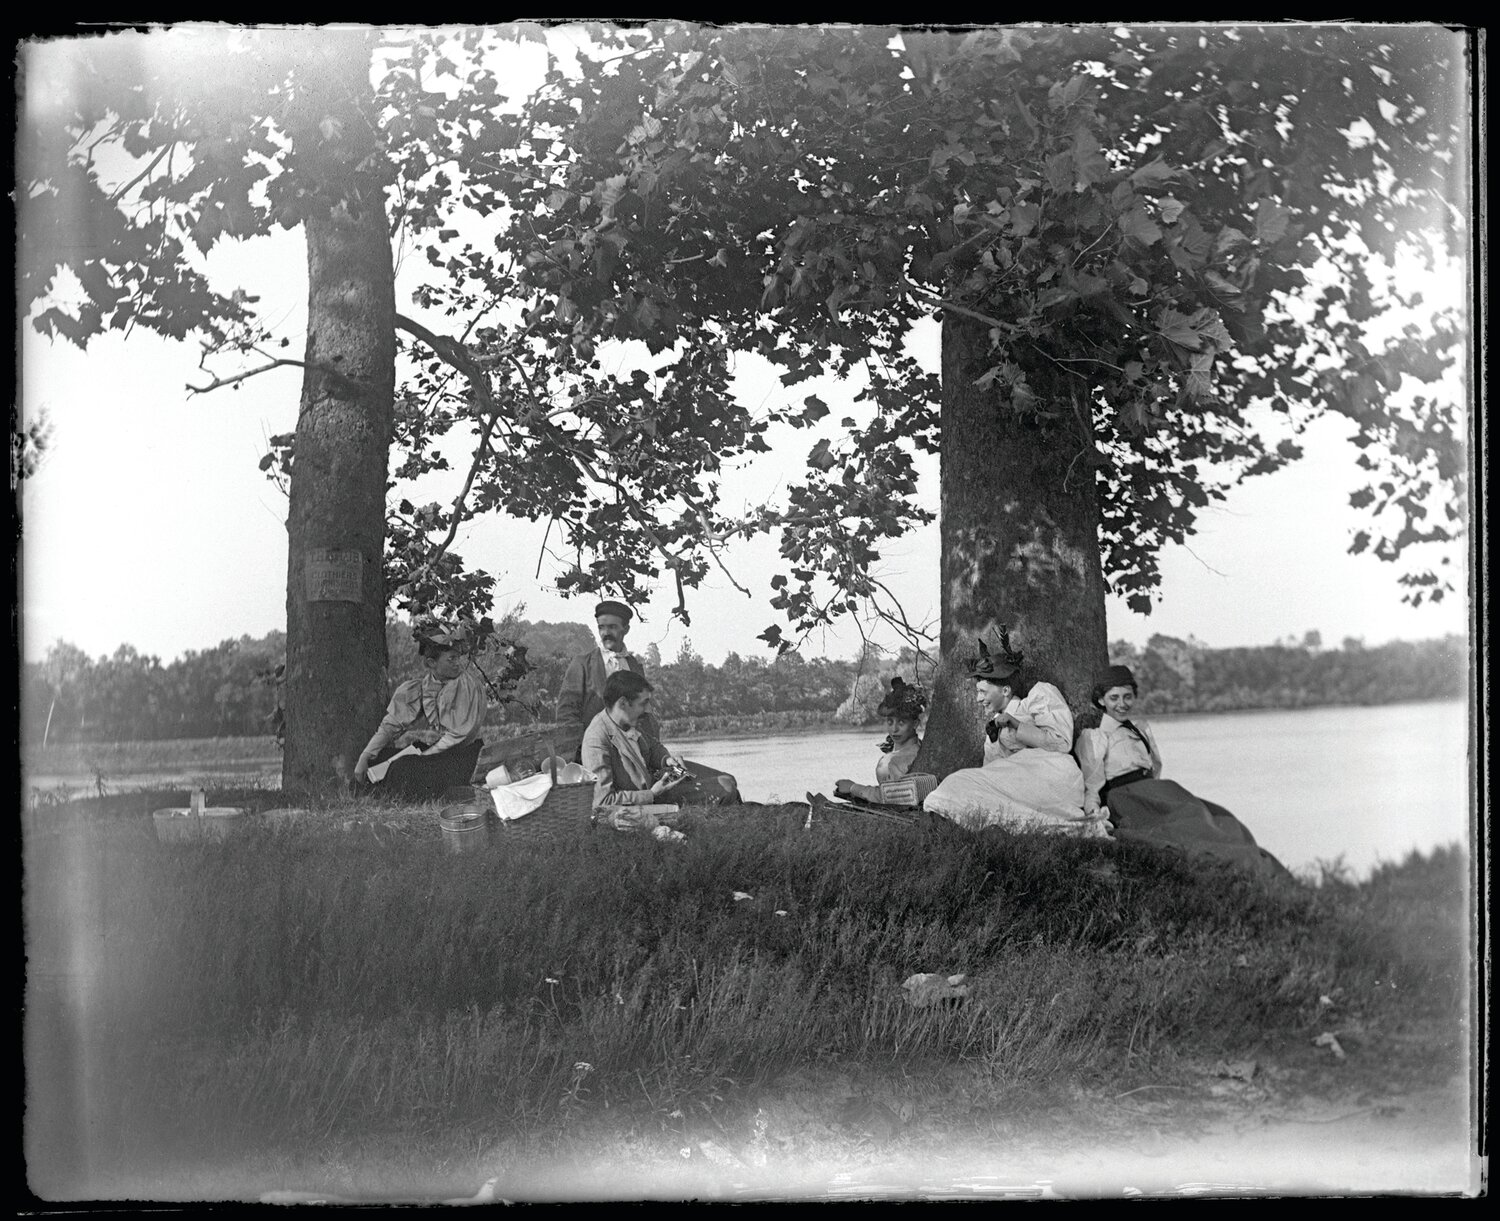 Grant Castner, center rear, and friends, picnic in Yardley, on July 4, 1894. This is a digital print from Castner’s original 4-by-5 glass plate negative, a gift of Robert R. Jones in Memory of William R. Paquin.